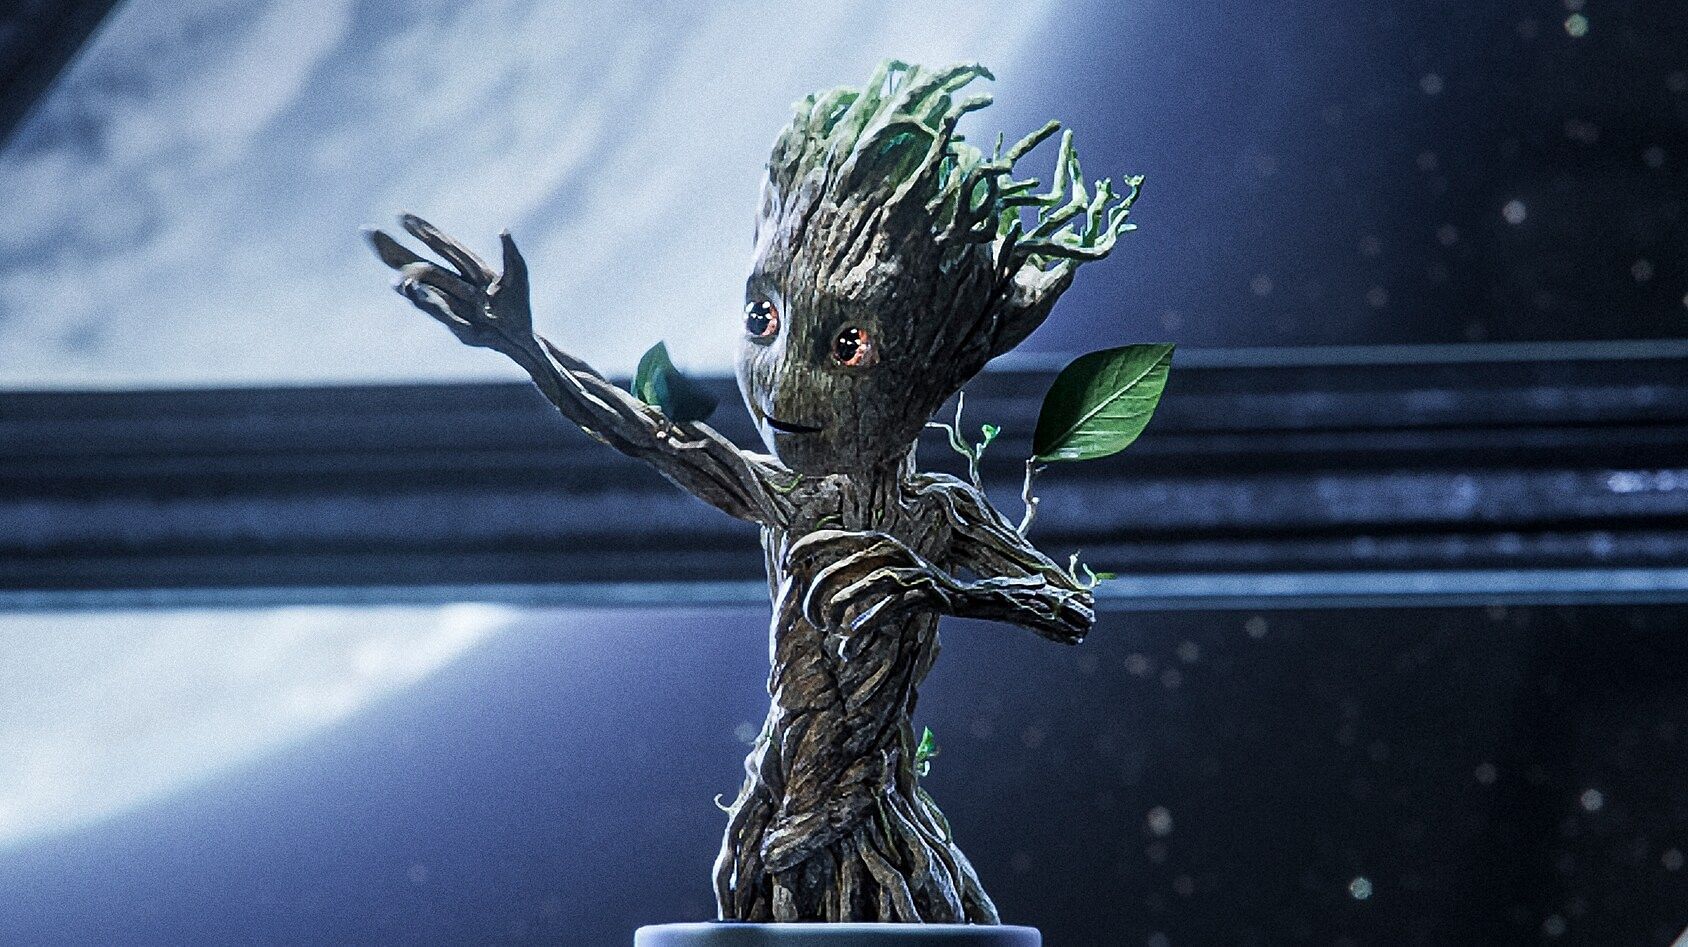 The series I am Groot is written by Kirsten Lepore Lepore. (Image via Marvel)